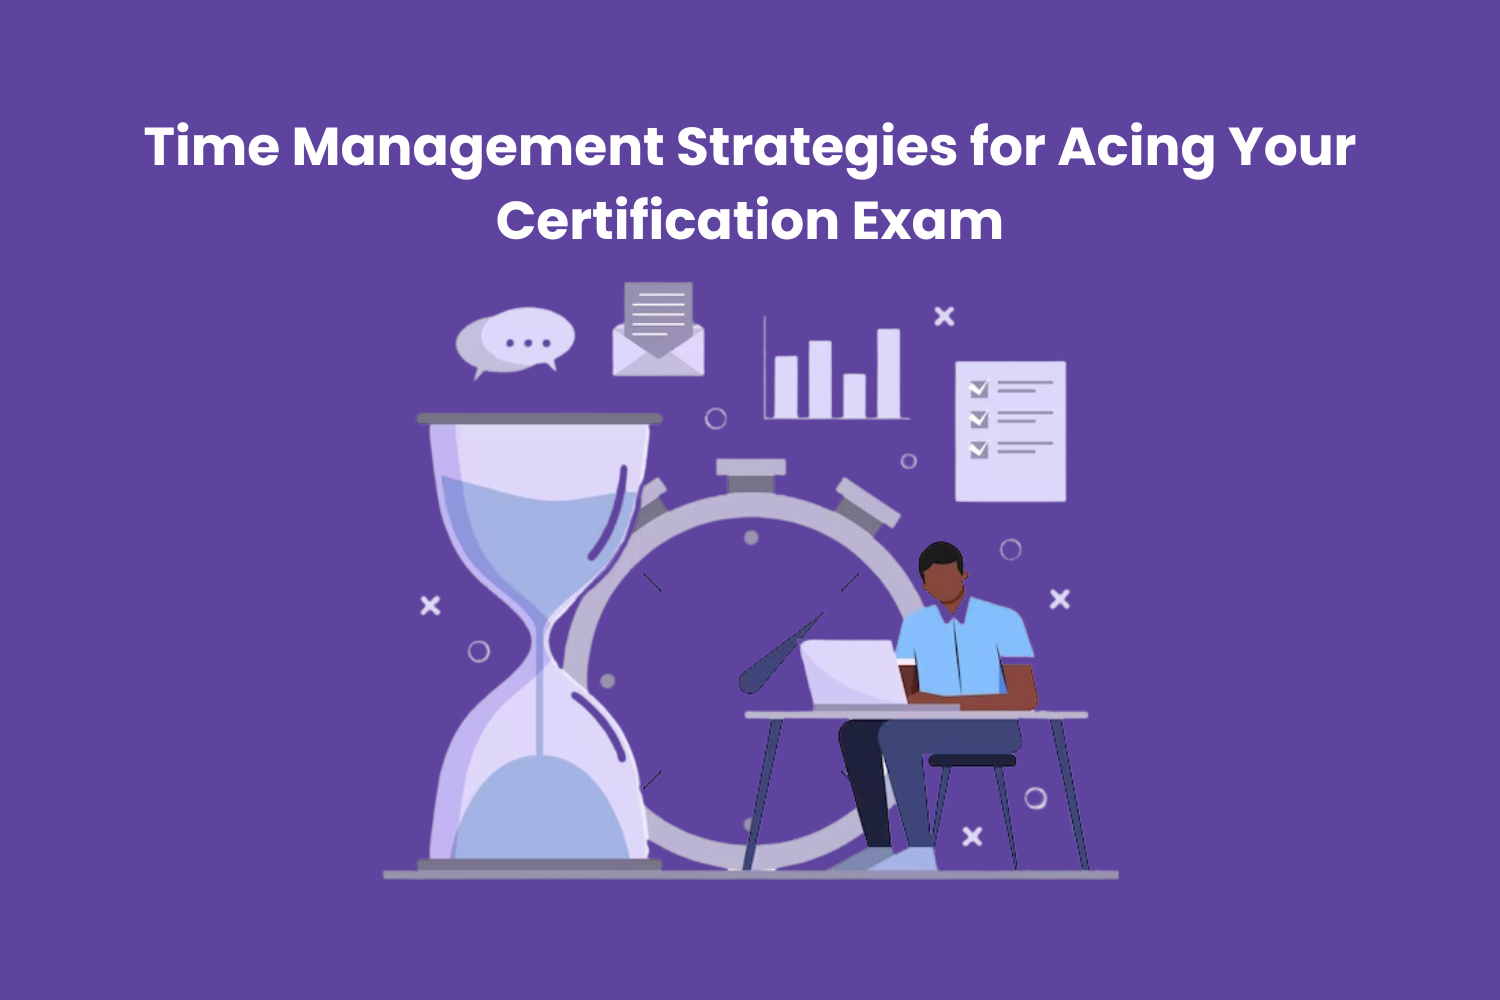 Time Management Strategies for Acing Your Certification Exam